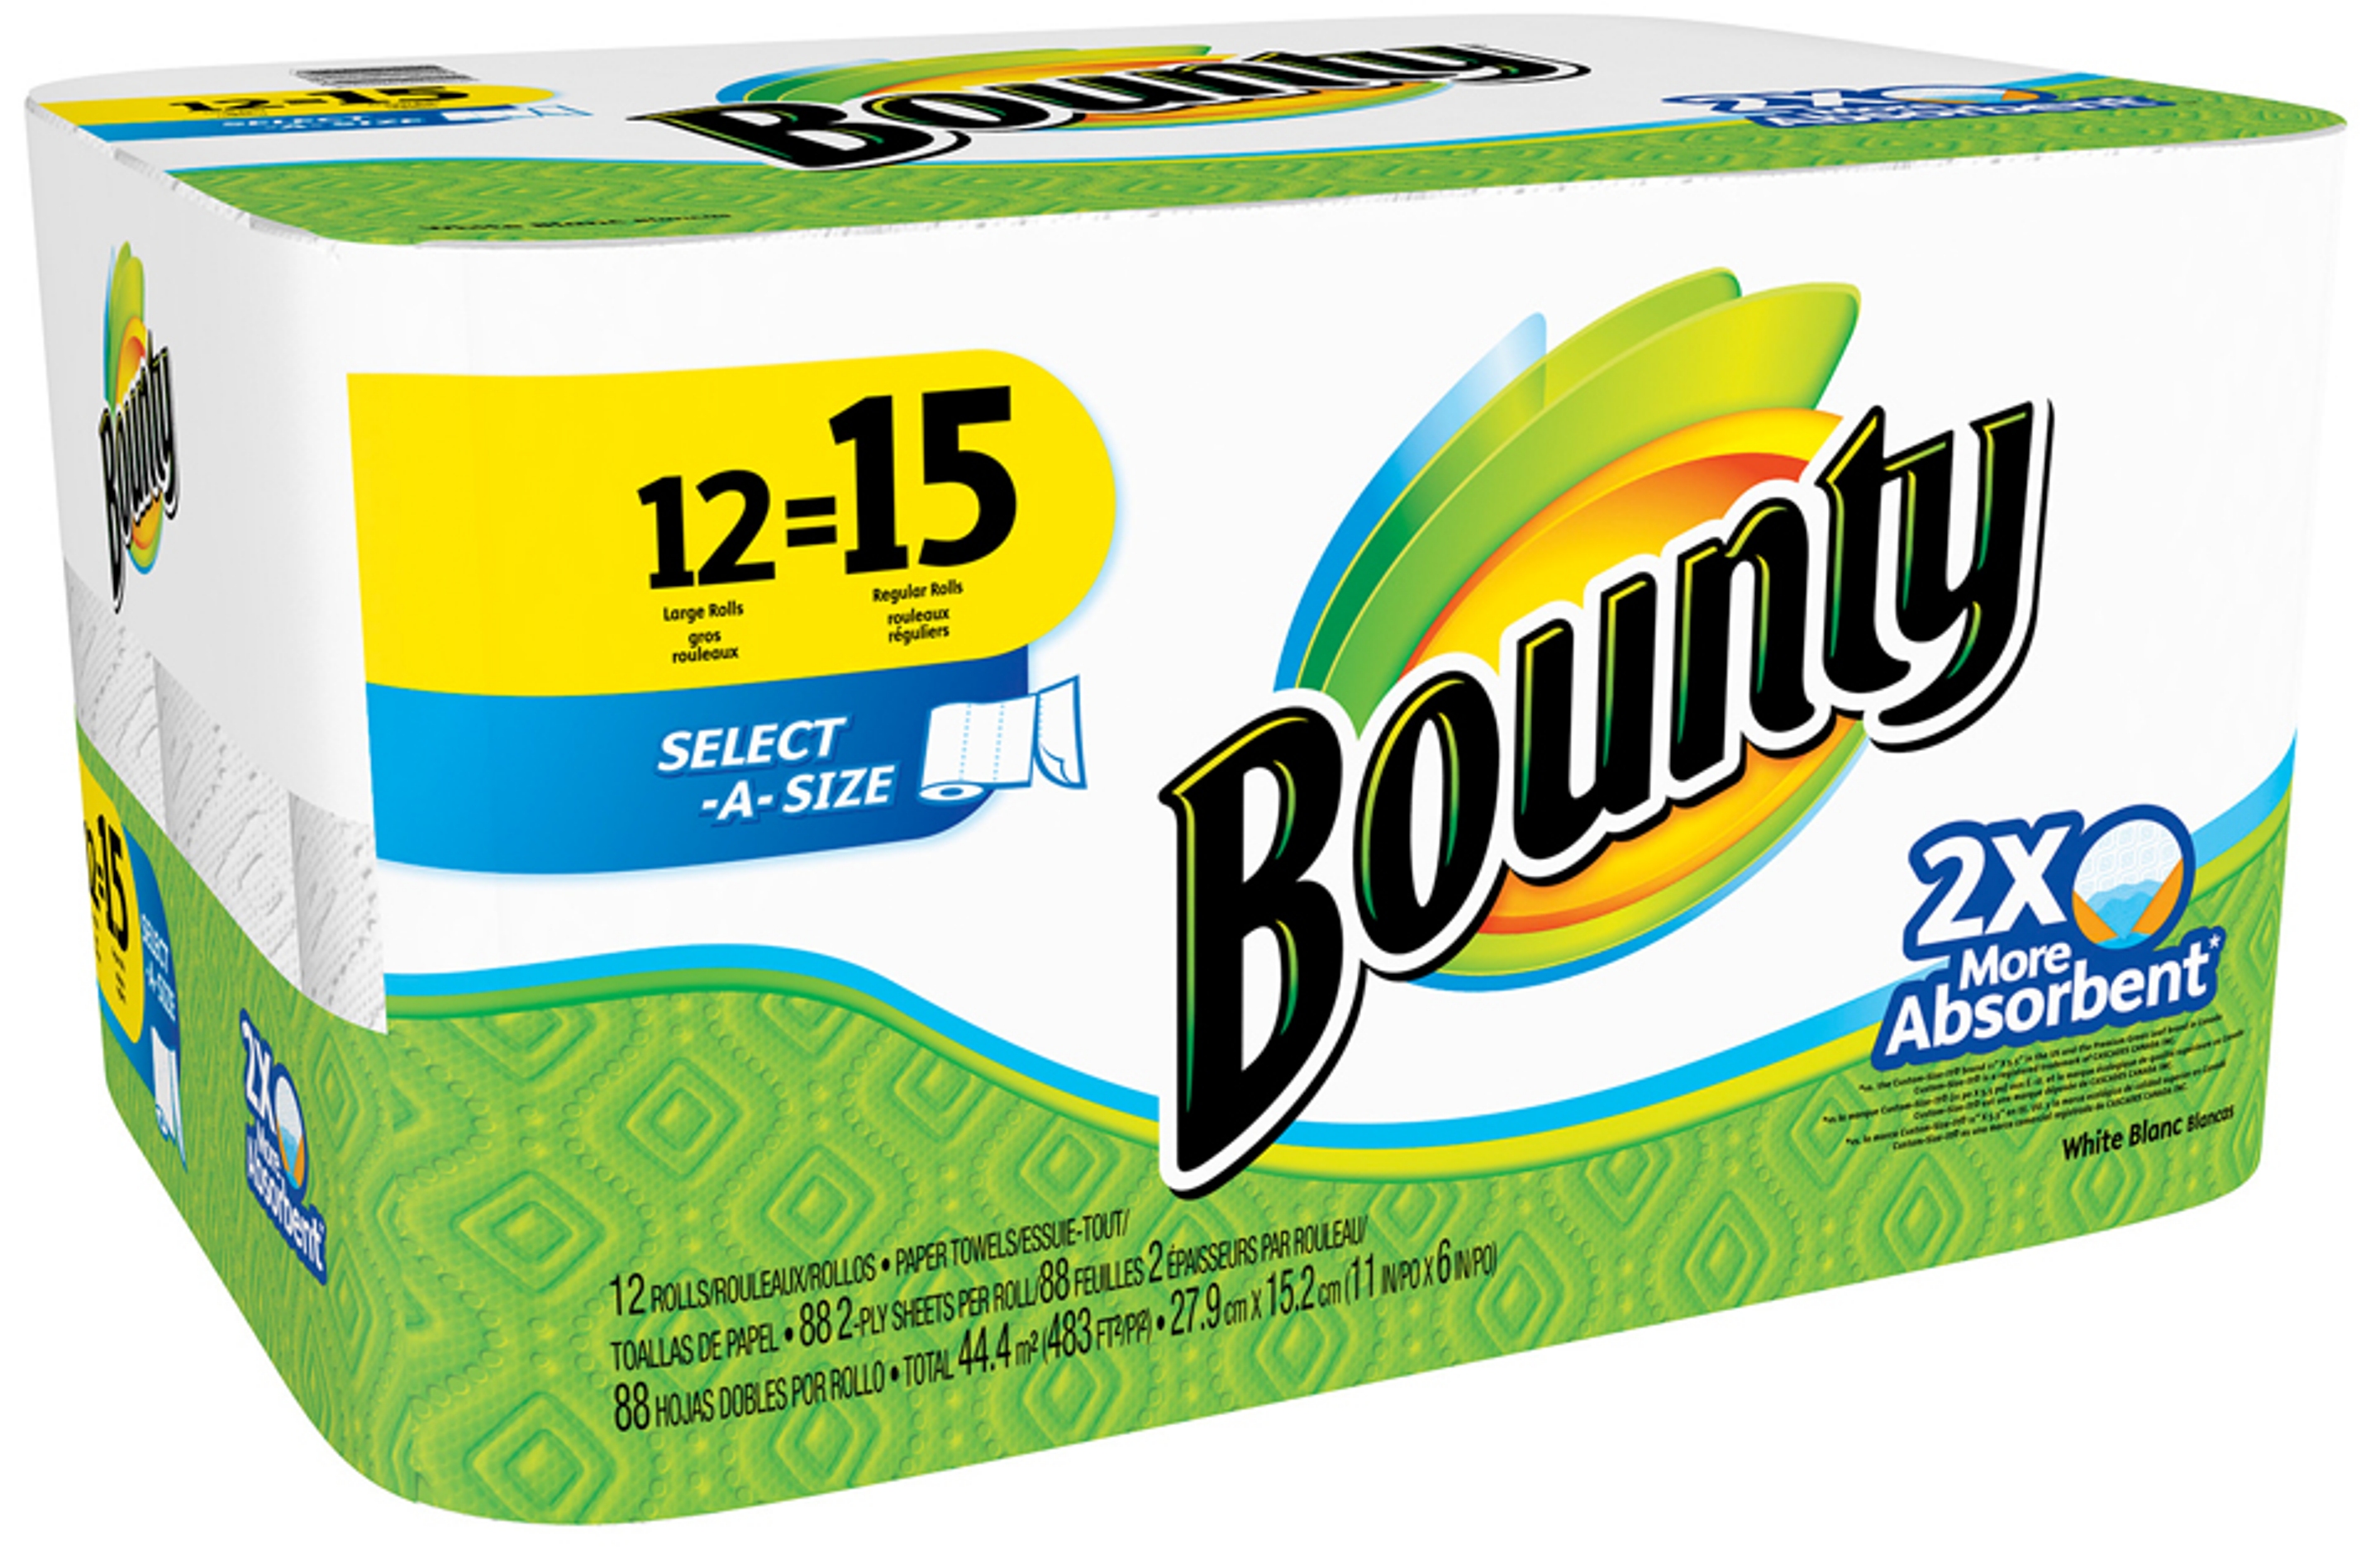 UPC 037000881988 product image for Bounty Select-a-Size Large Roll Paper Towels 12 CT PACK | upcitemdb.com